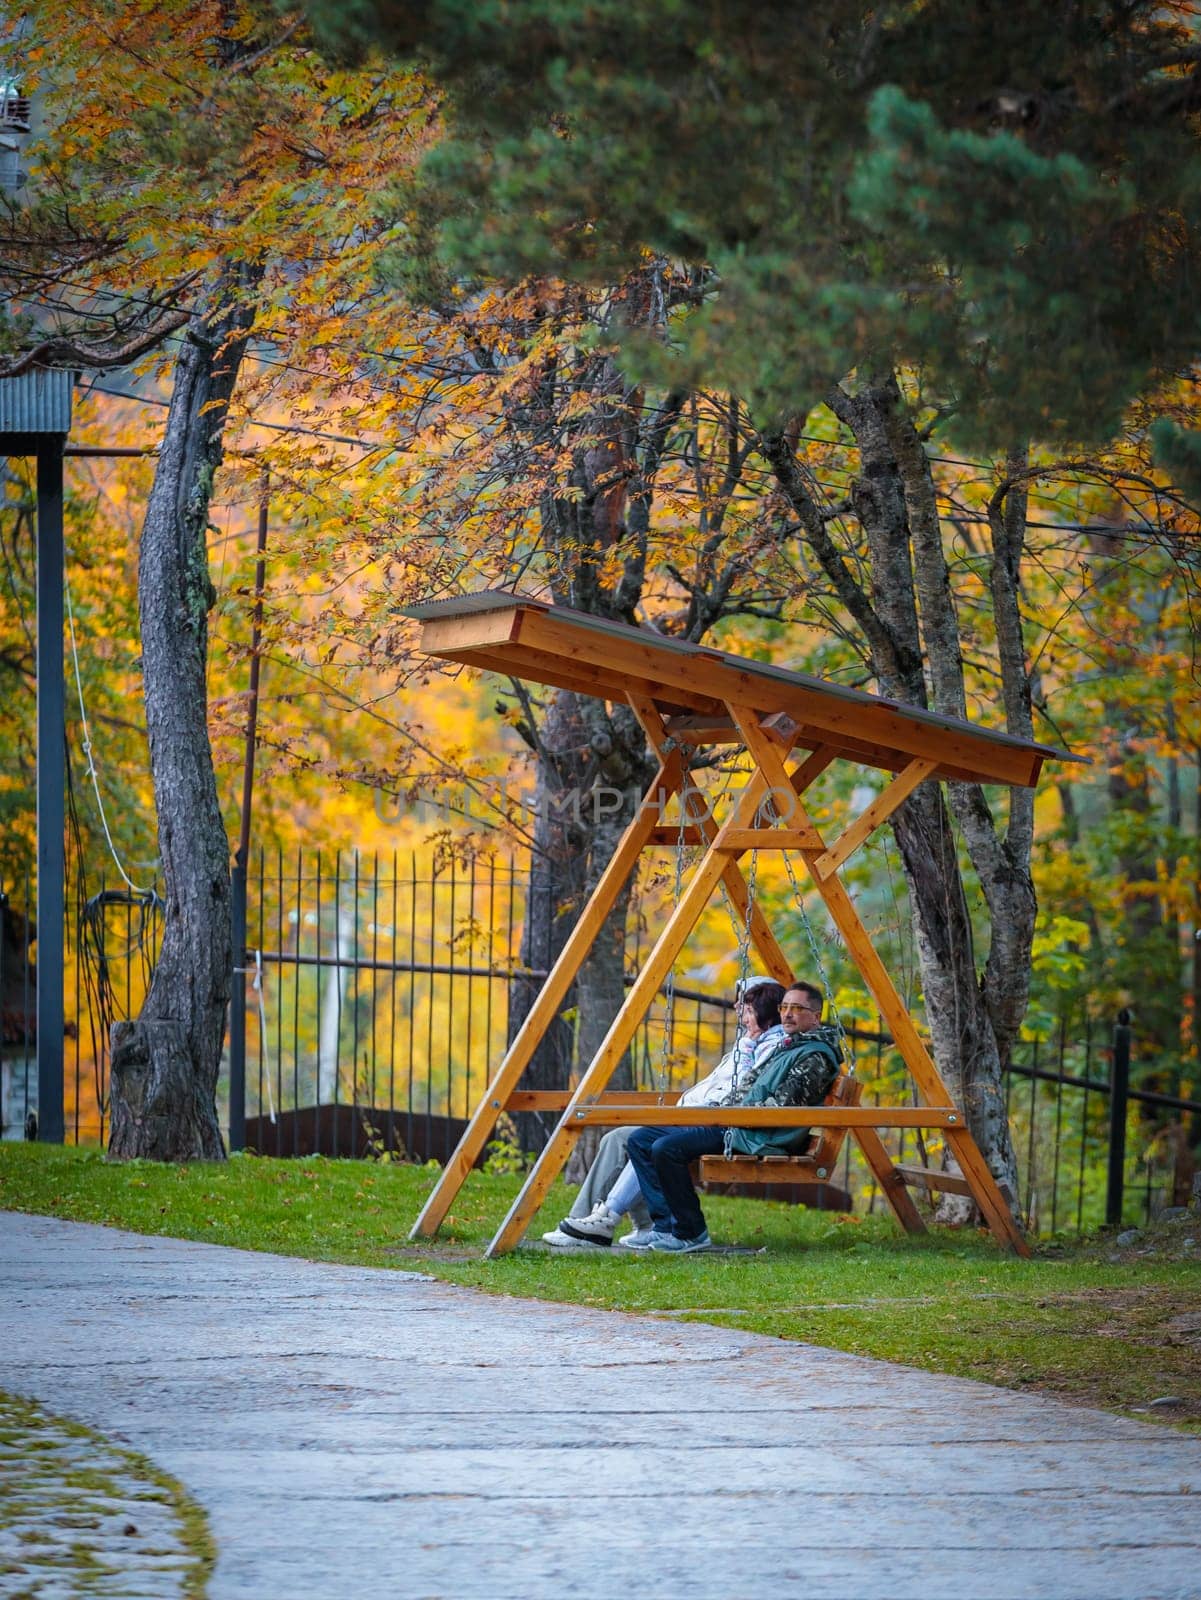 Cute couple enjoying bright autumn colors while relaxing on park bench by Yurich32